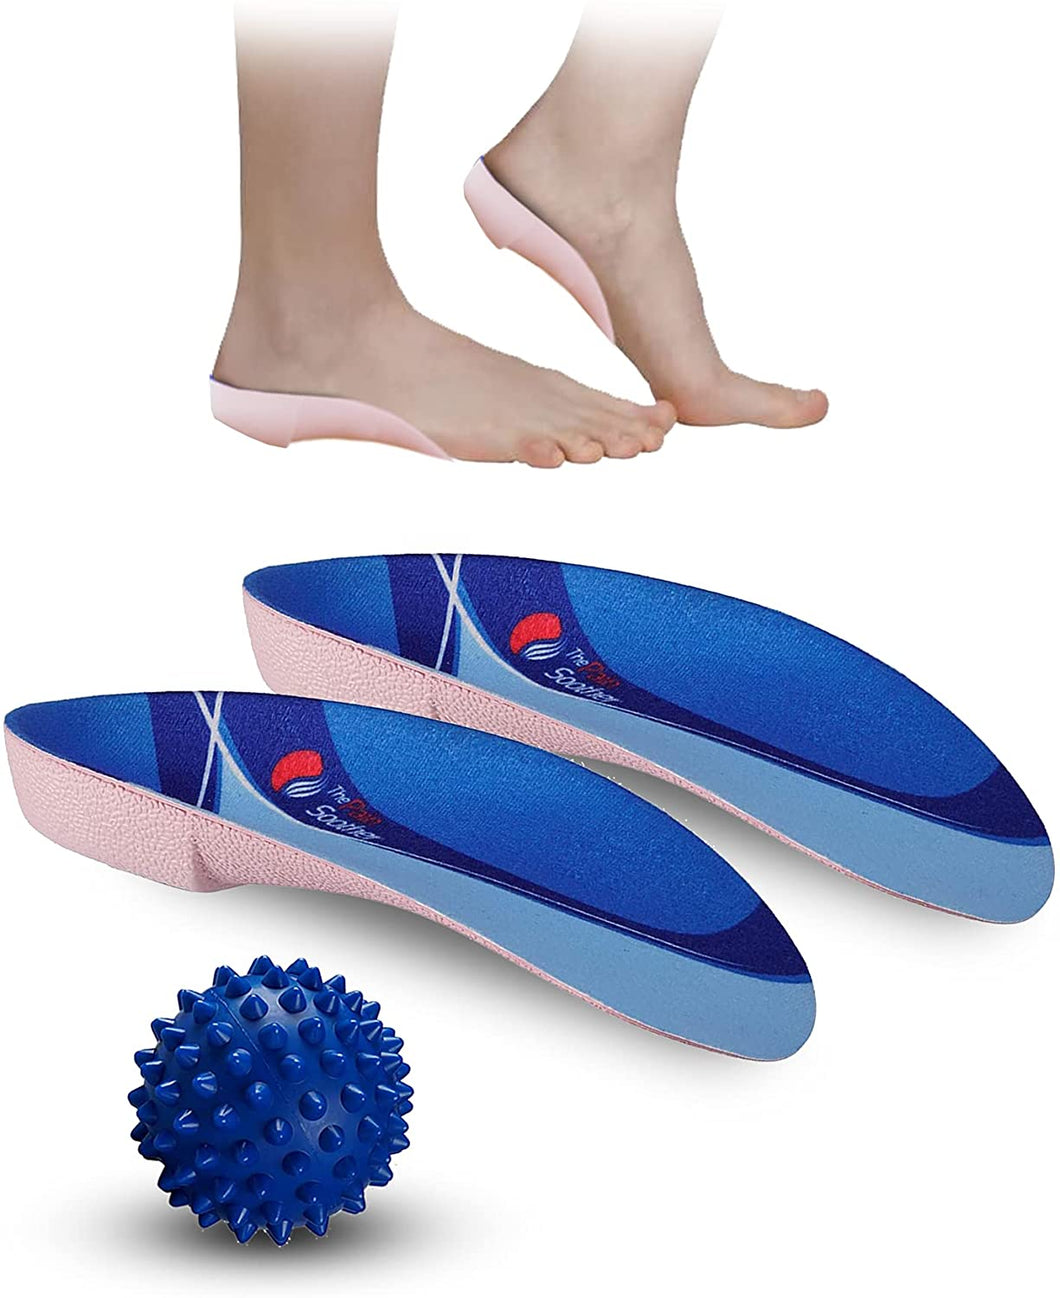 BLOW OUT SALE!  WHILE SUPPLIES LAST!  -  Shoe Inserts for Plantar Fasciitis - Strong High Arch Support Insoles - HSA or FSA Eligible